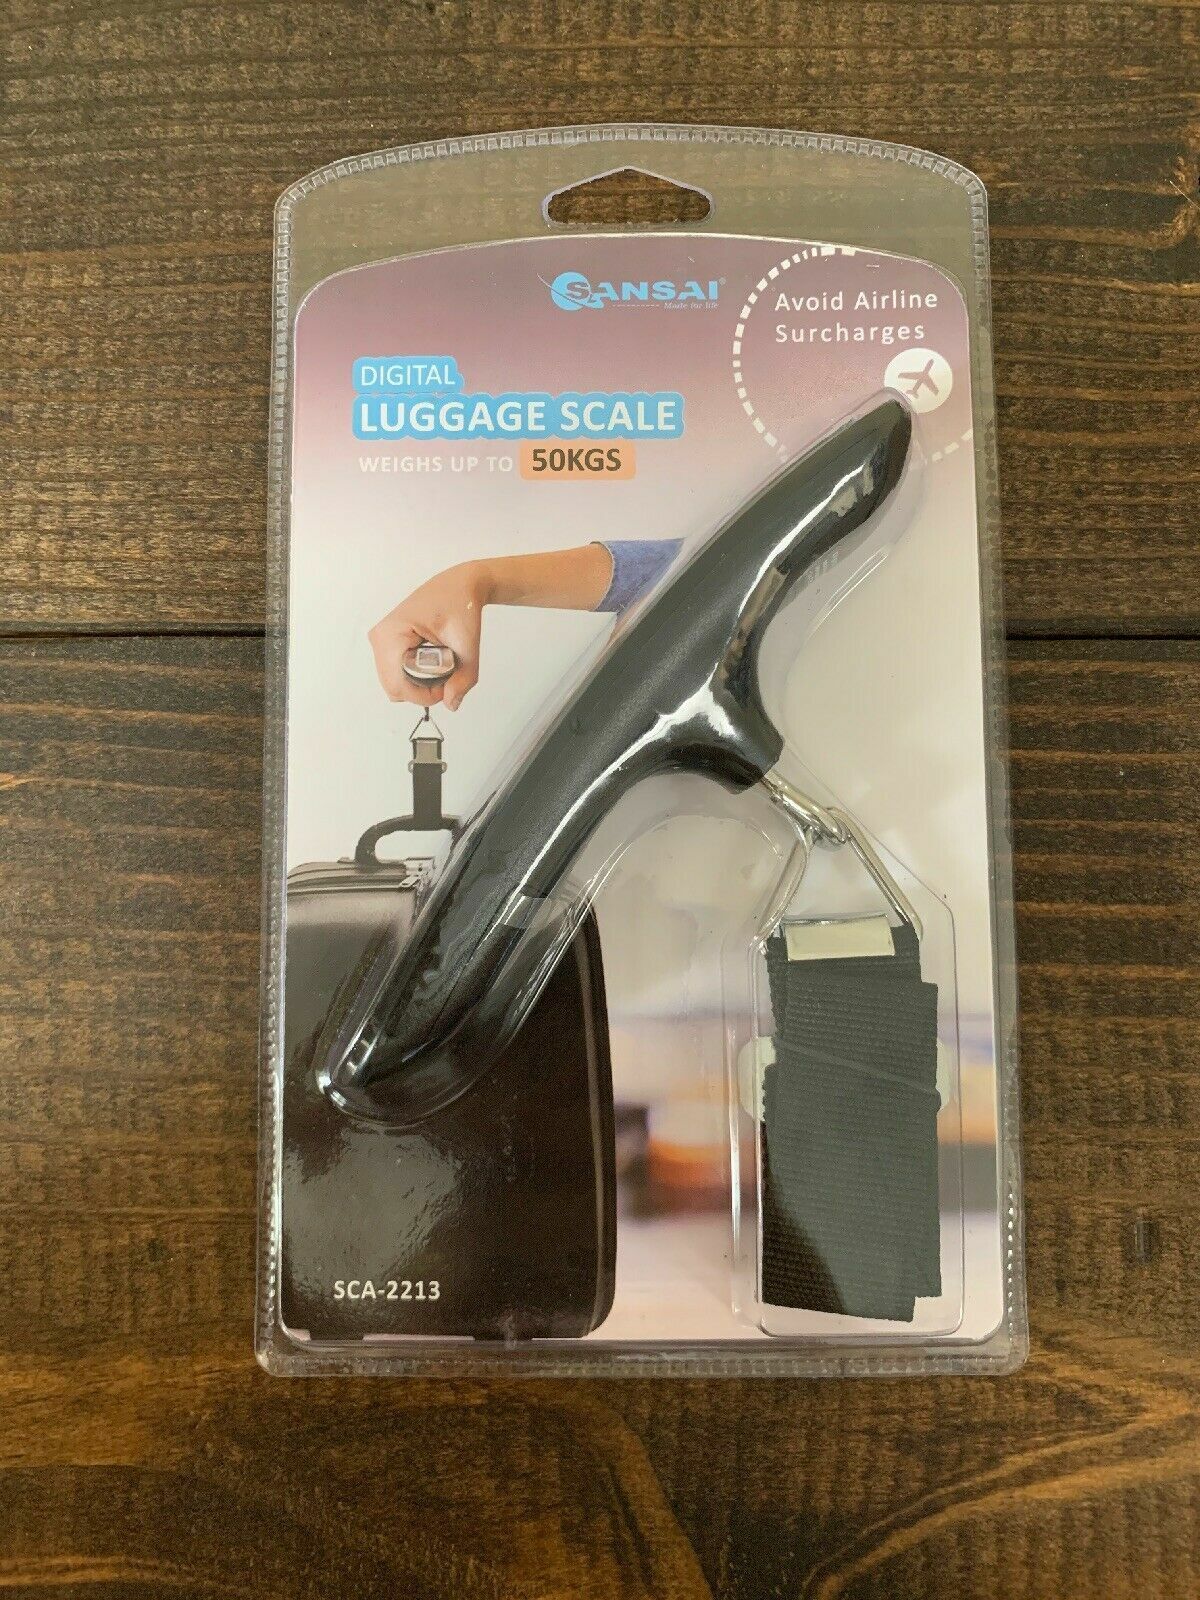 Sansai Digital Luggage Scale~Weighs Up To 50 KGS~SCA-2213~New & Sealed